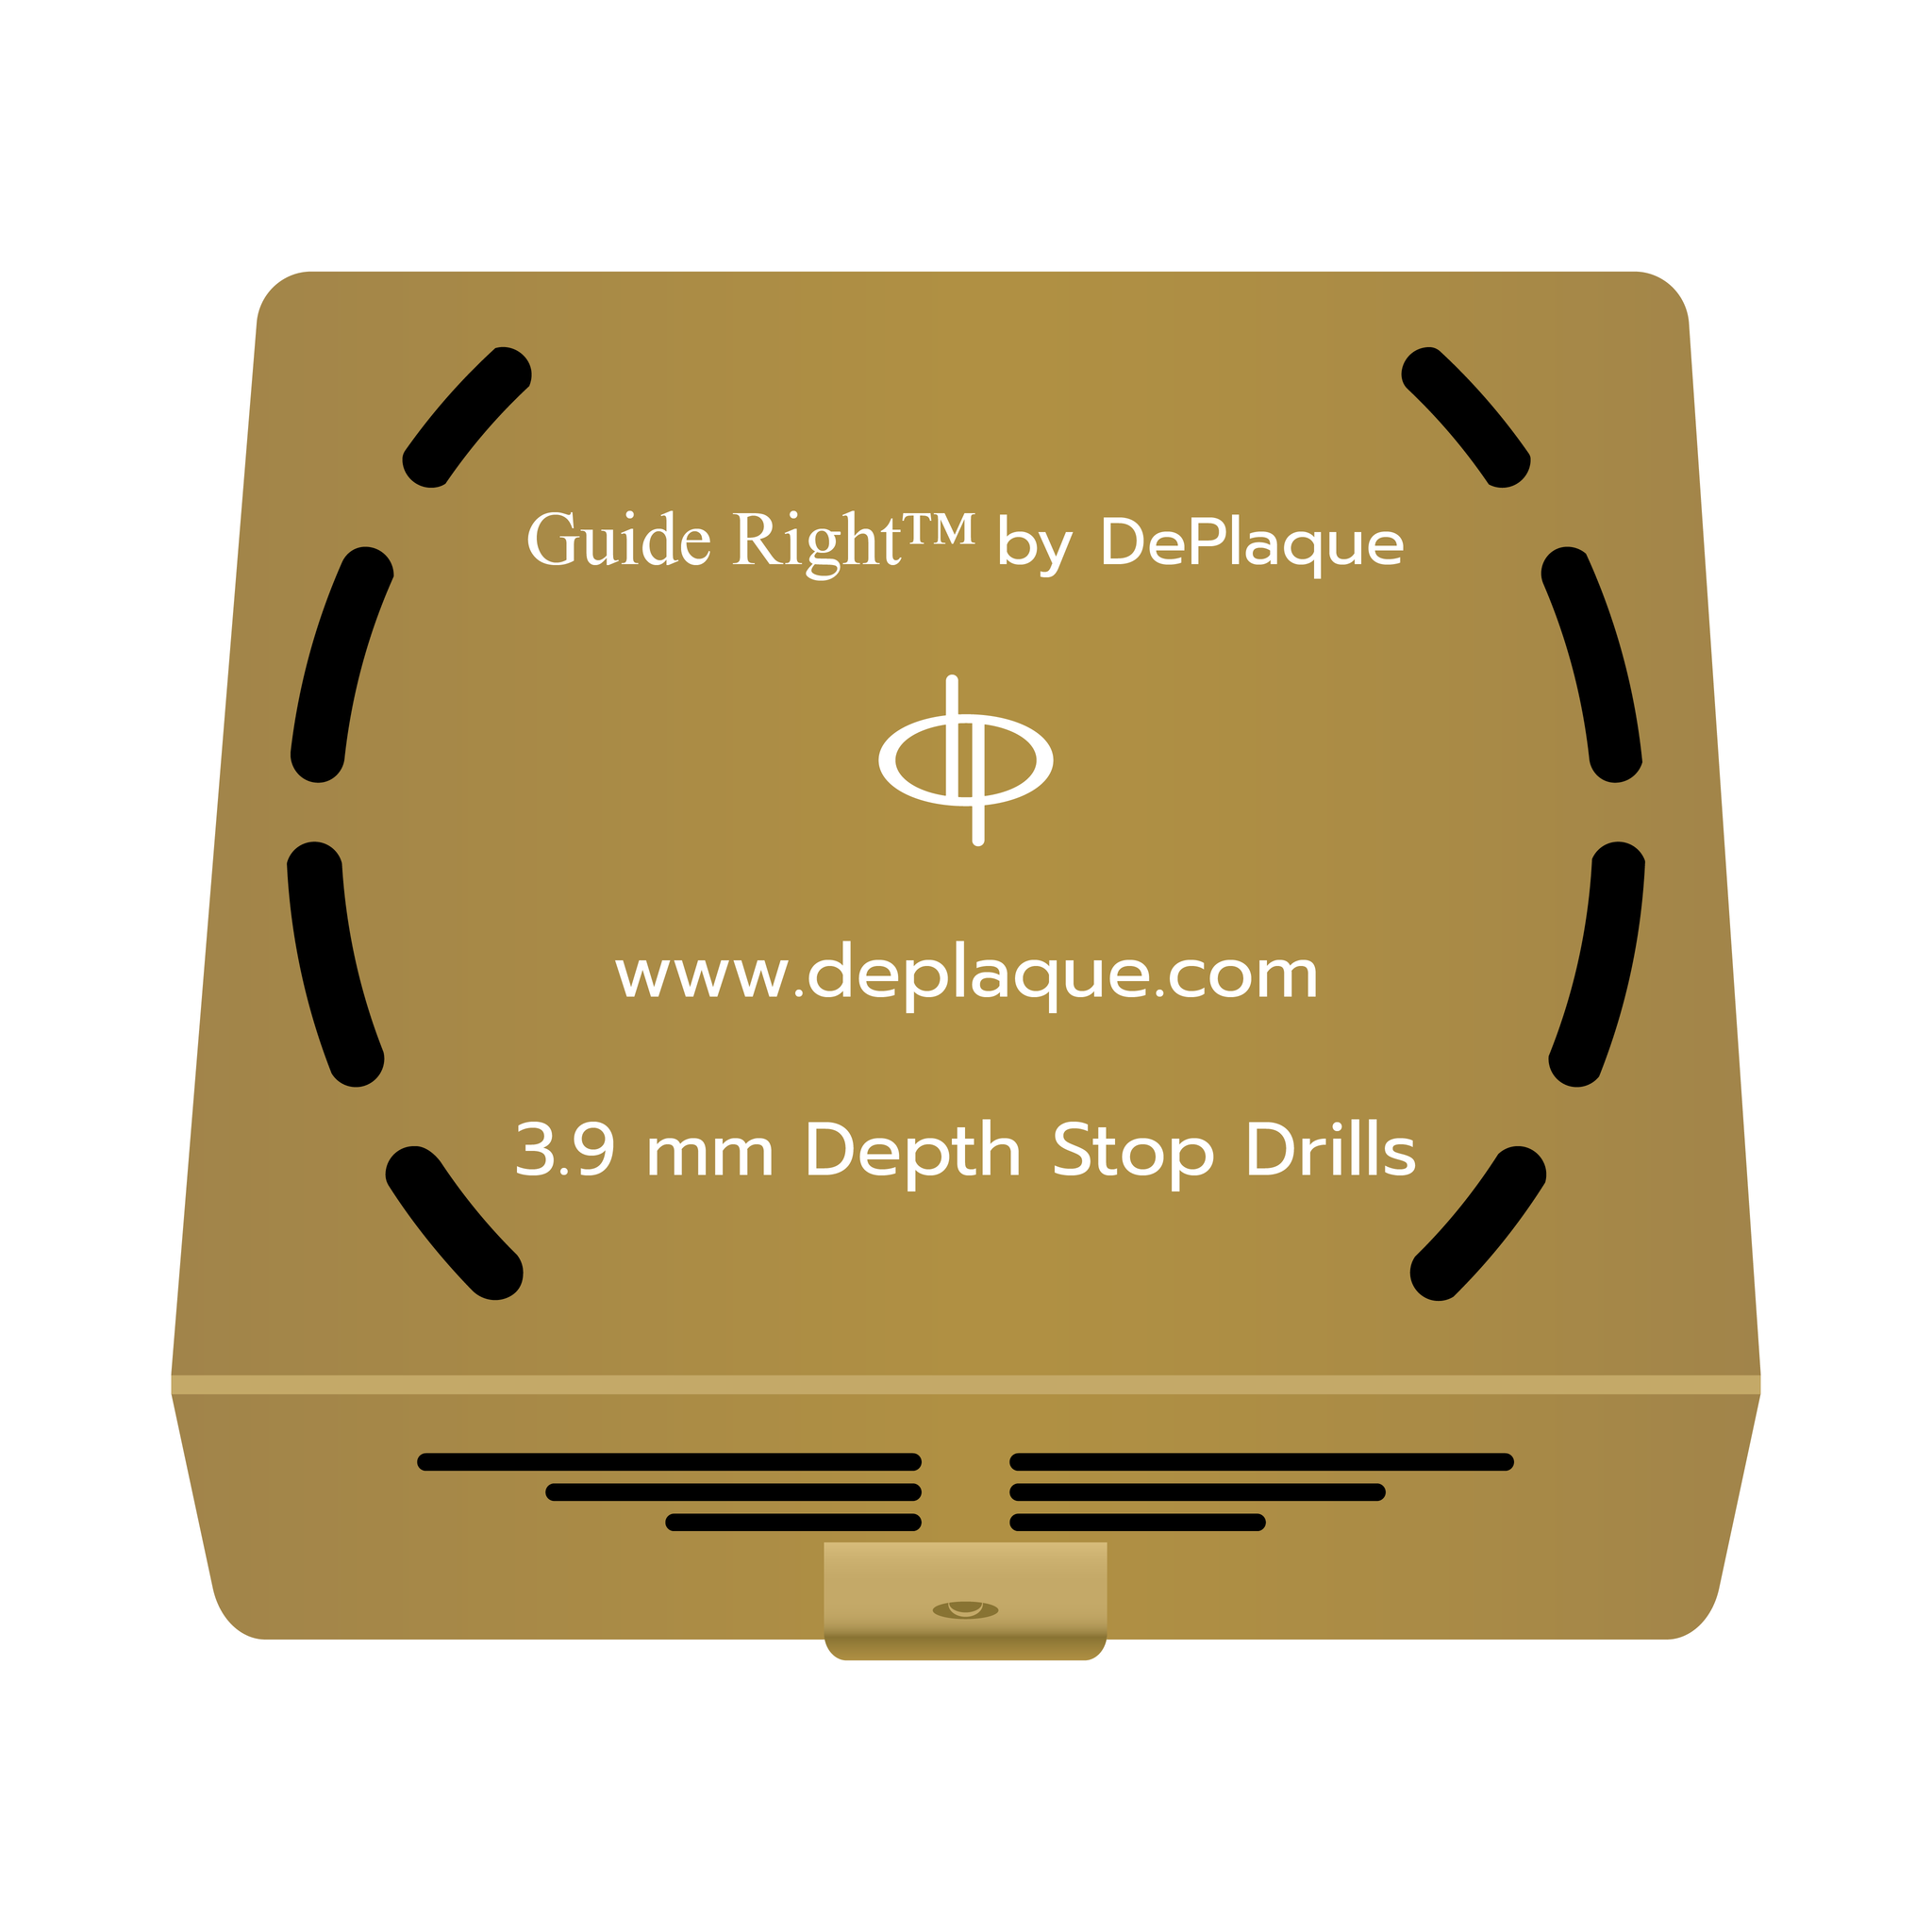 A gold square metal box. The box says ‘Guide Right™ by DePlaque, a ‘dp’ logo, ‘www.deplaque.com,’ and 3.9 millimeter Depth Stop Drills.